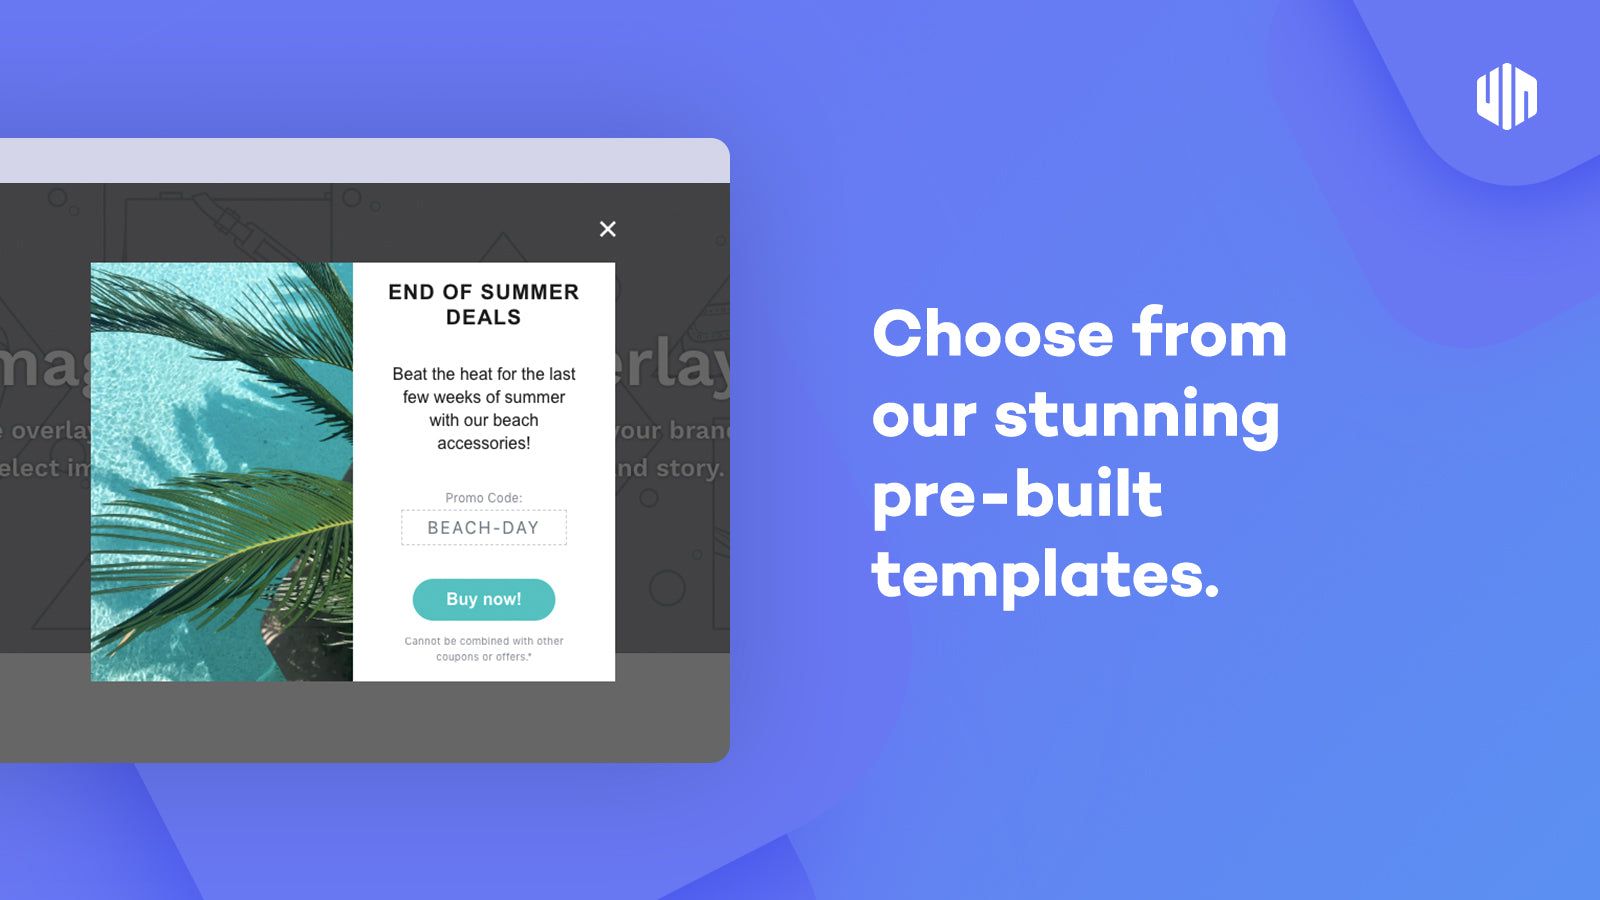 UI Ave Popups - Choose from our stunning pre-built templates